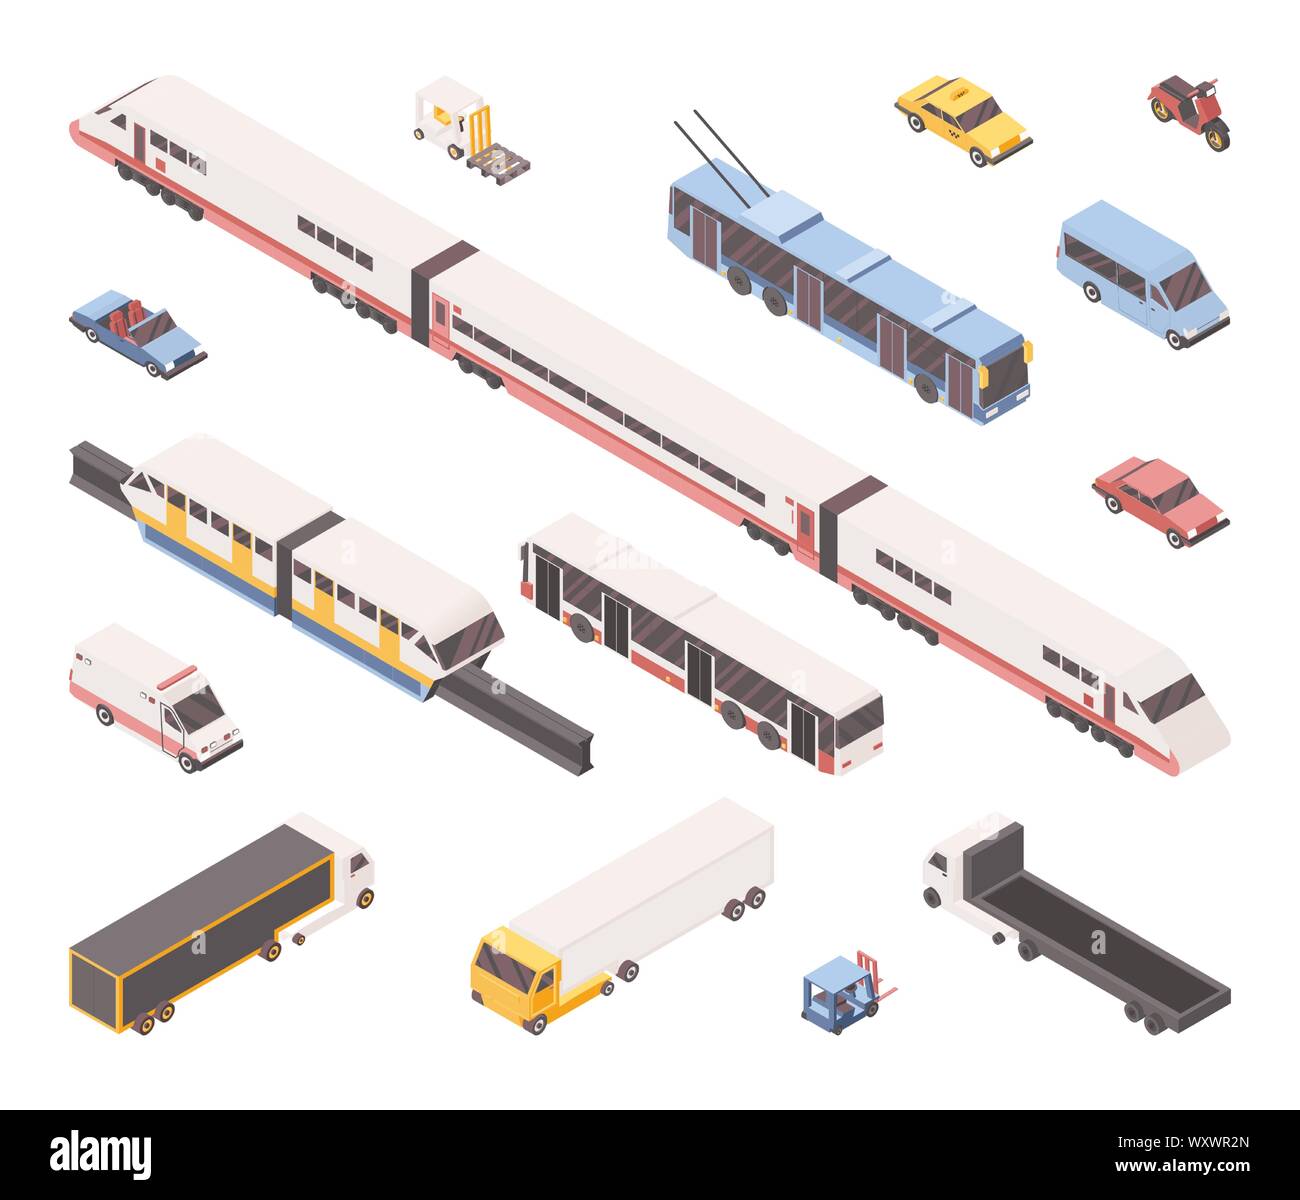 City transport isometric vector illustrations set. Public and industrial vehicles pack, urban travel service. Subway train, light rail, passenger cars, ambulance, bus, freight trucks and forklift Stock Vector